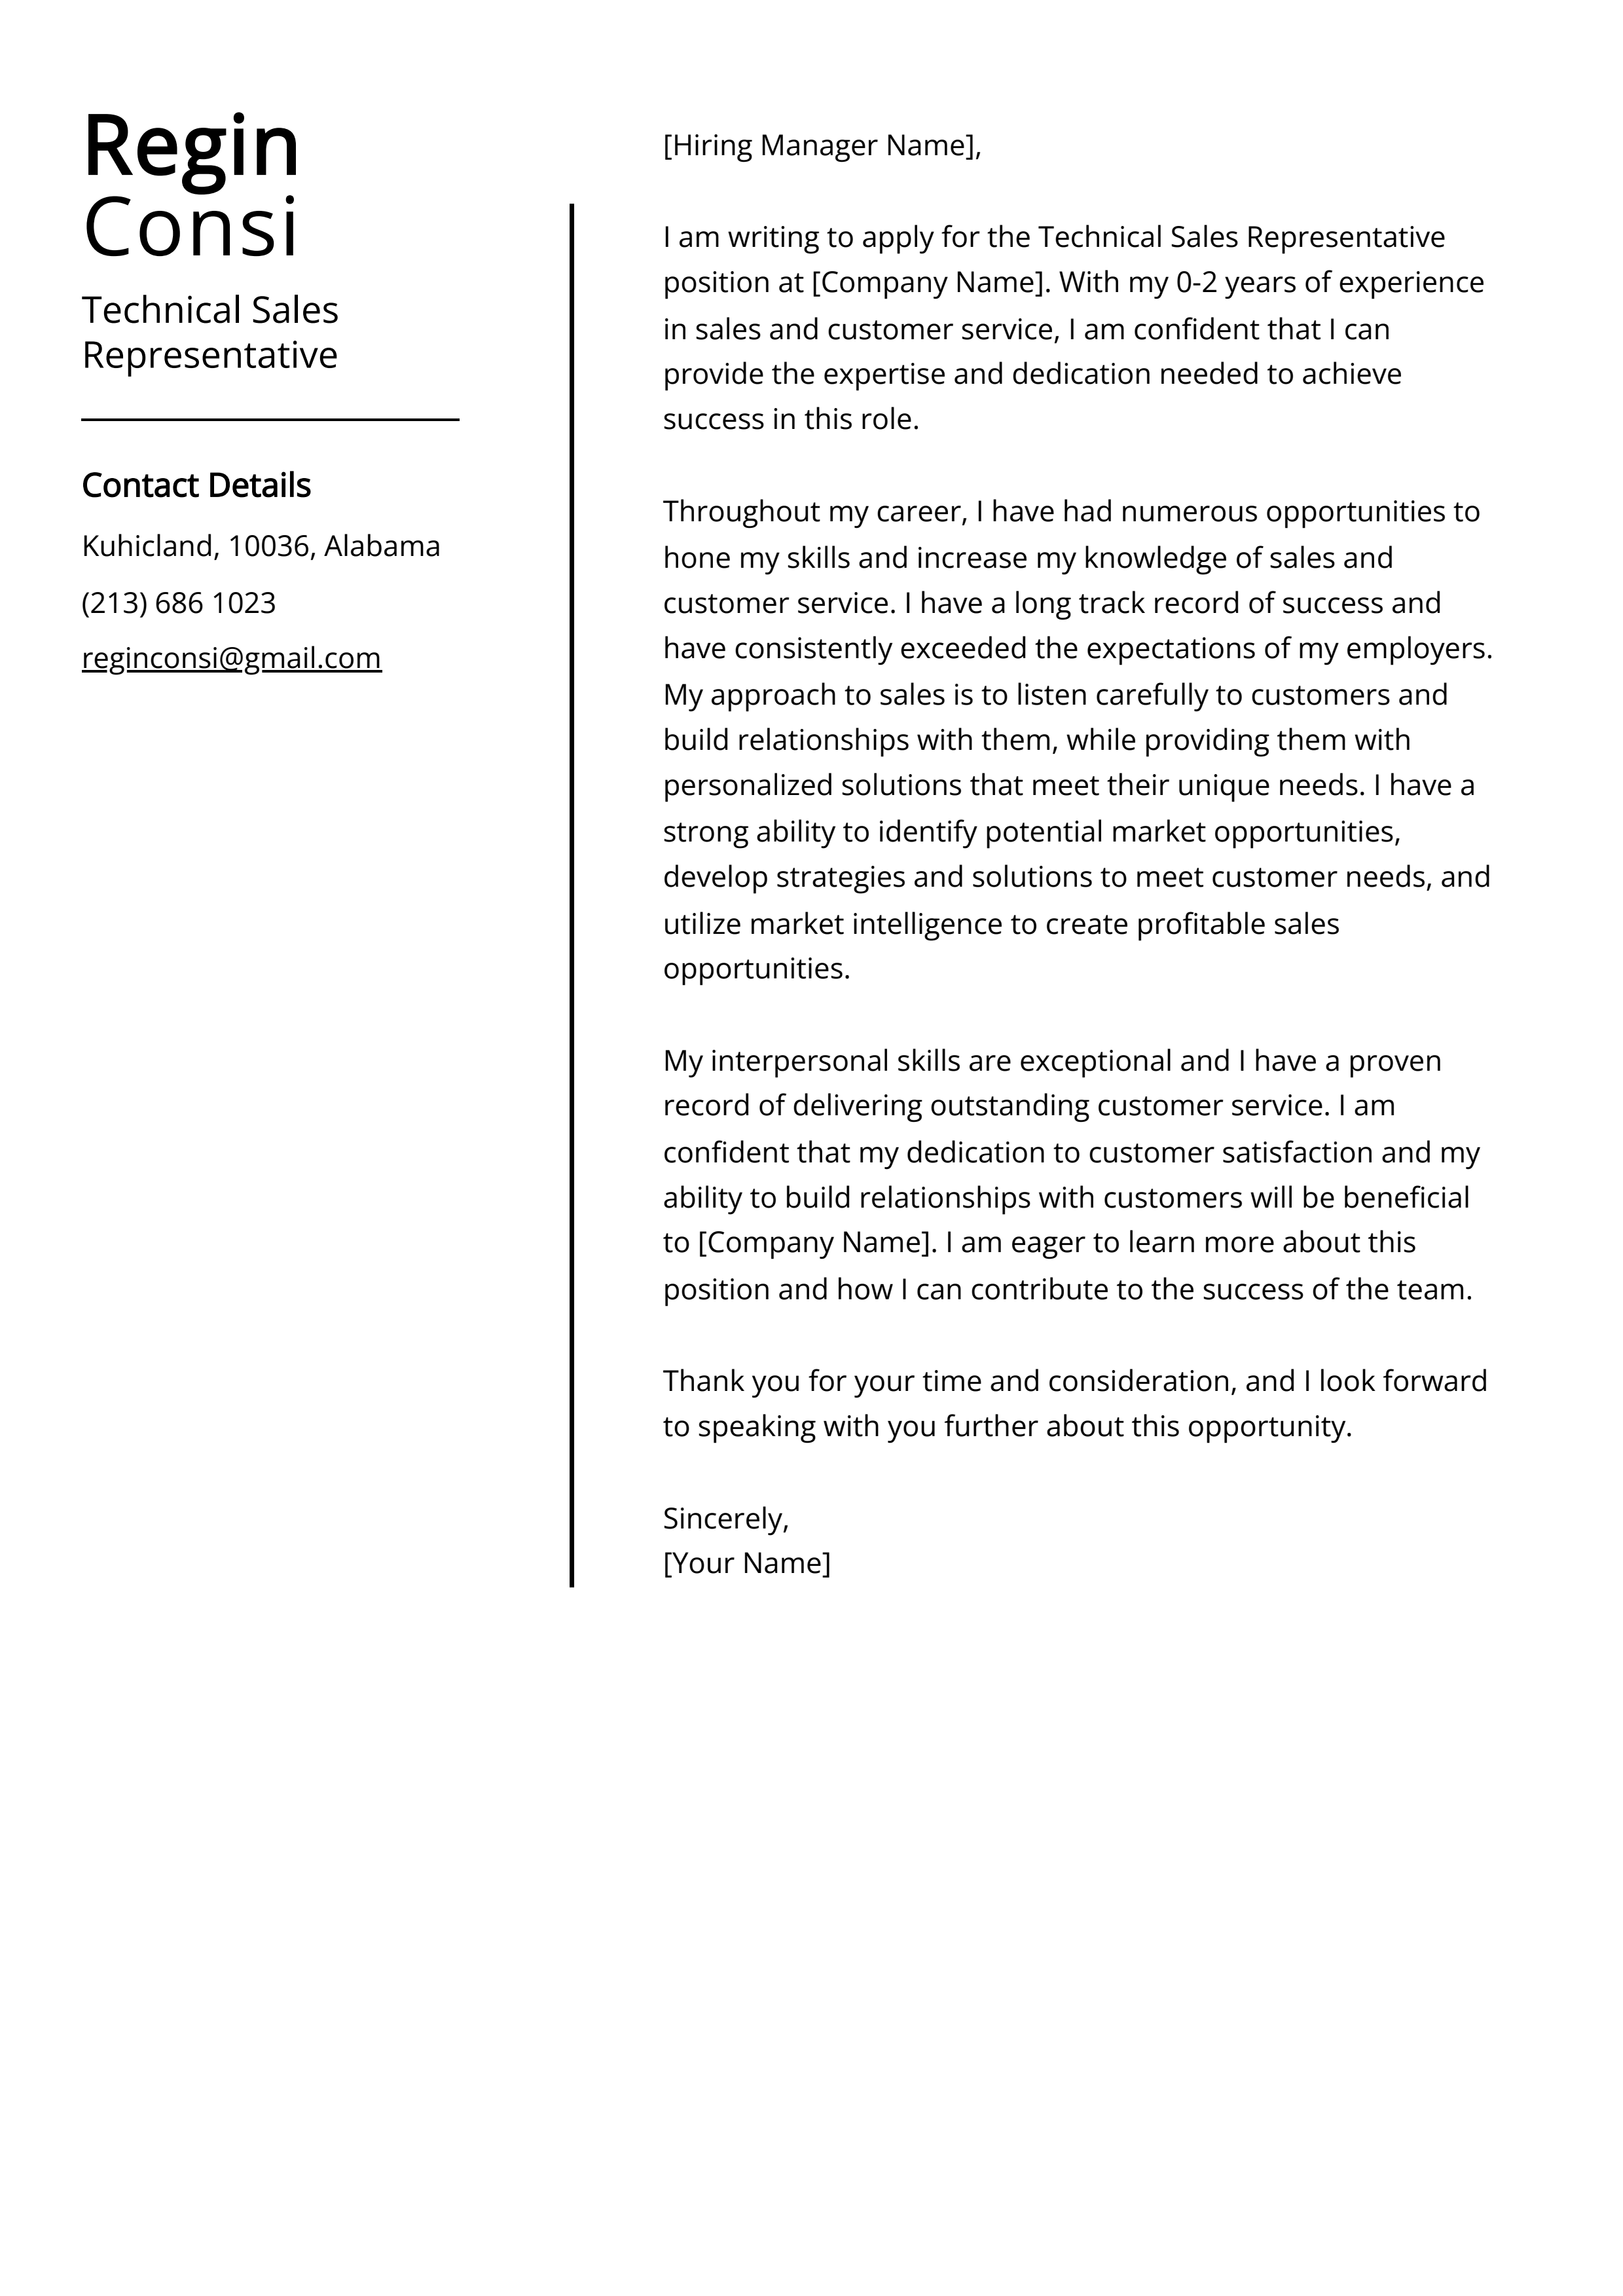 Technical Sales Representative Cover Letter Example